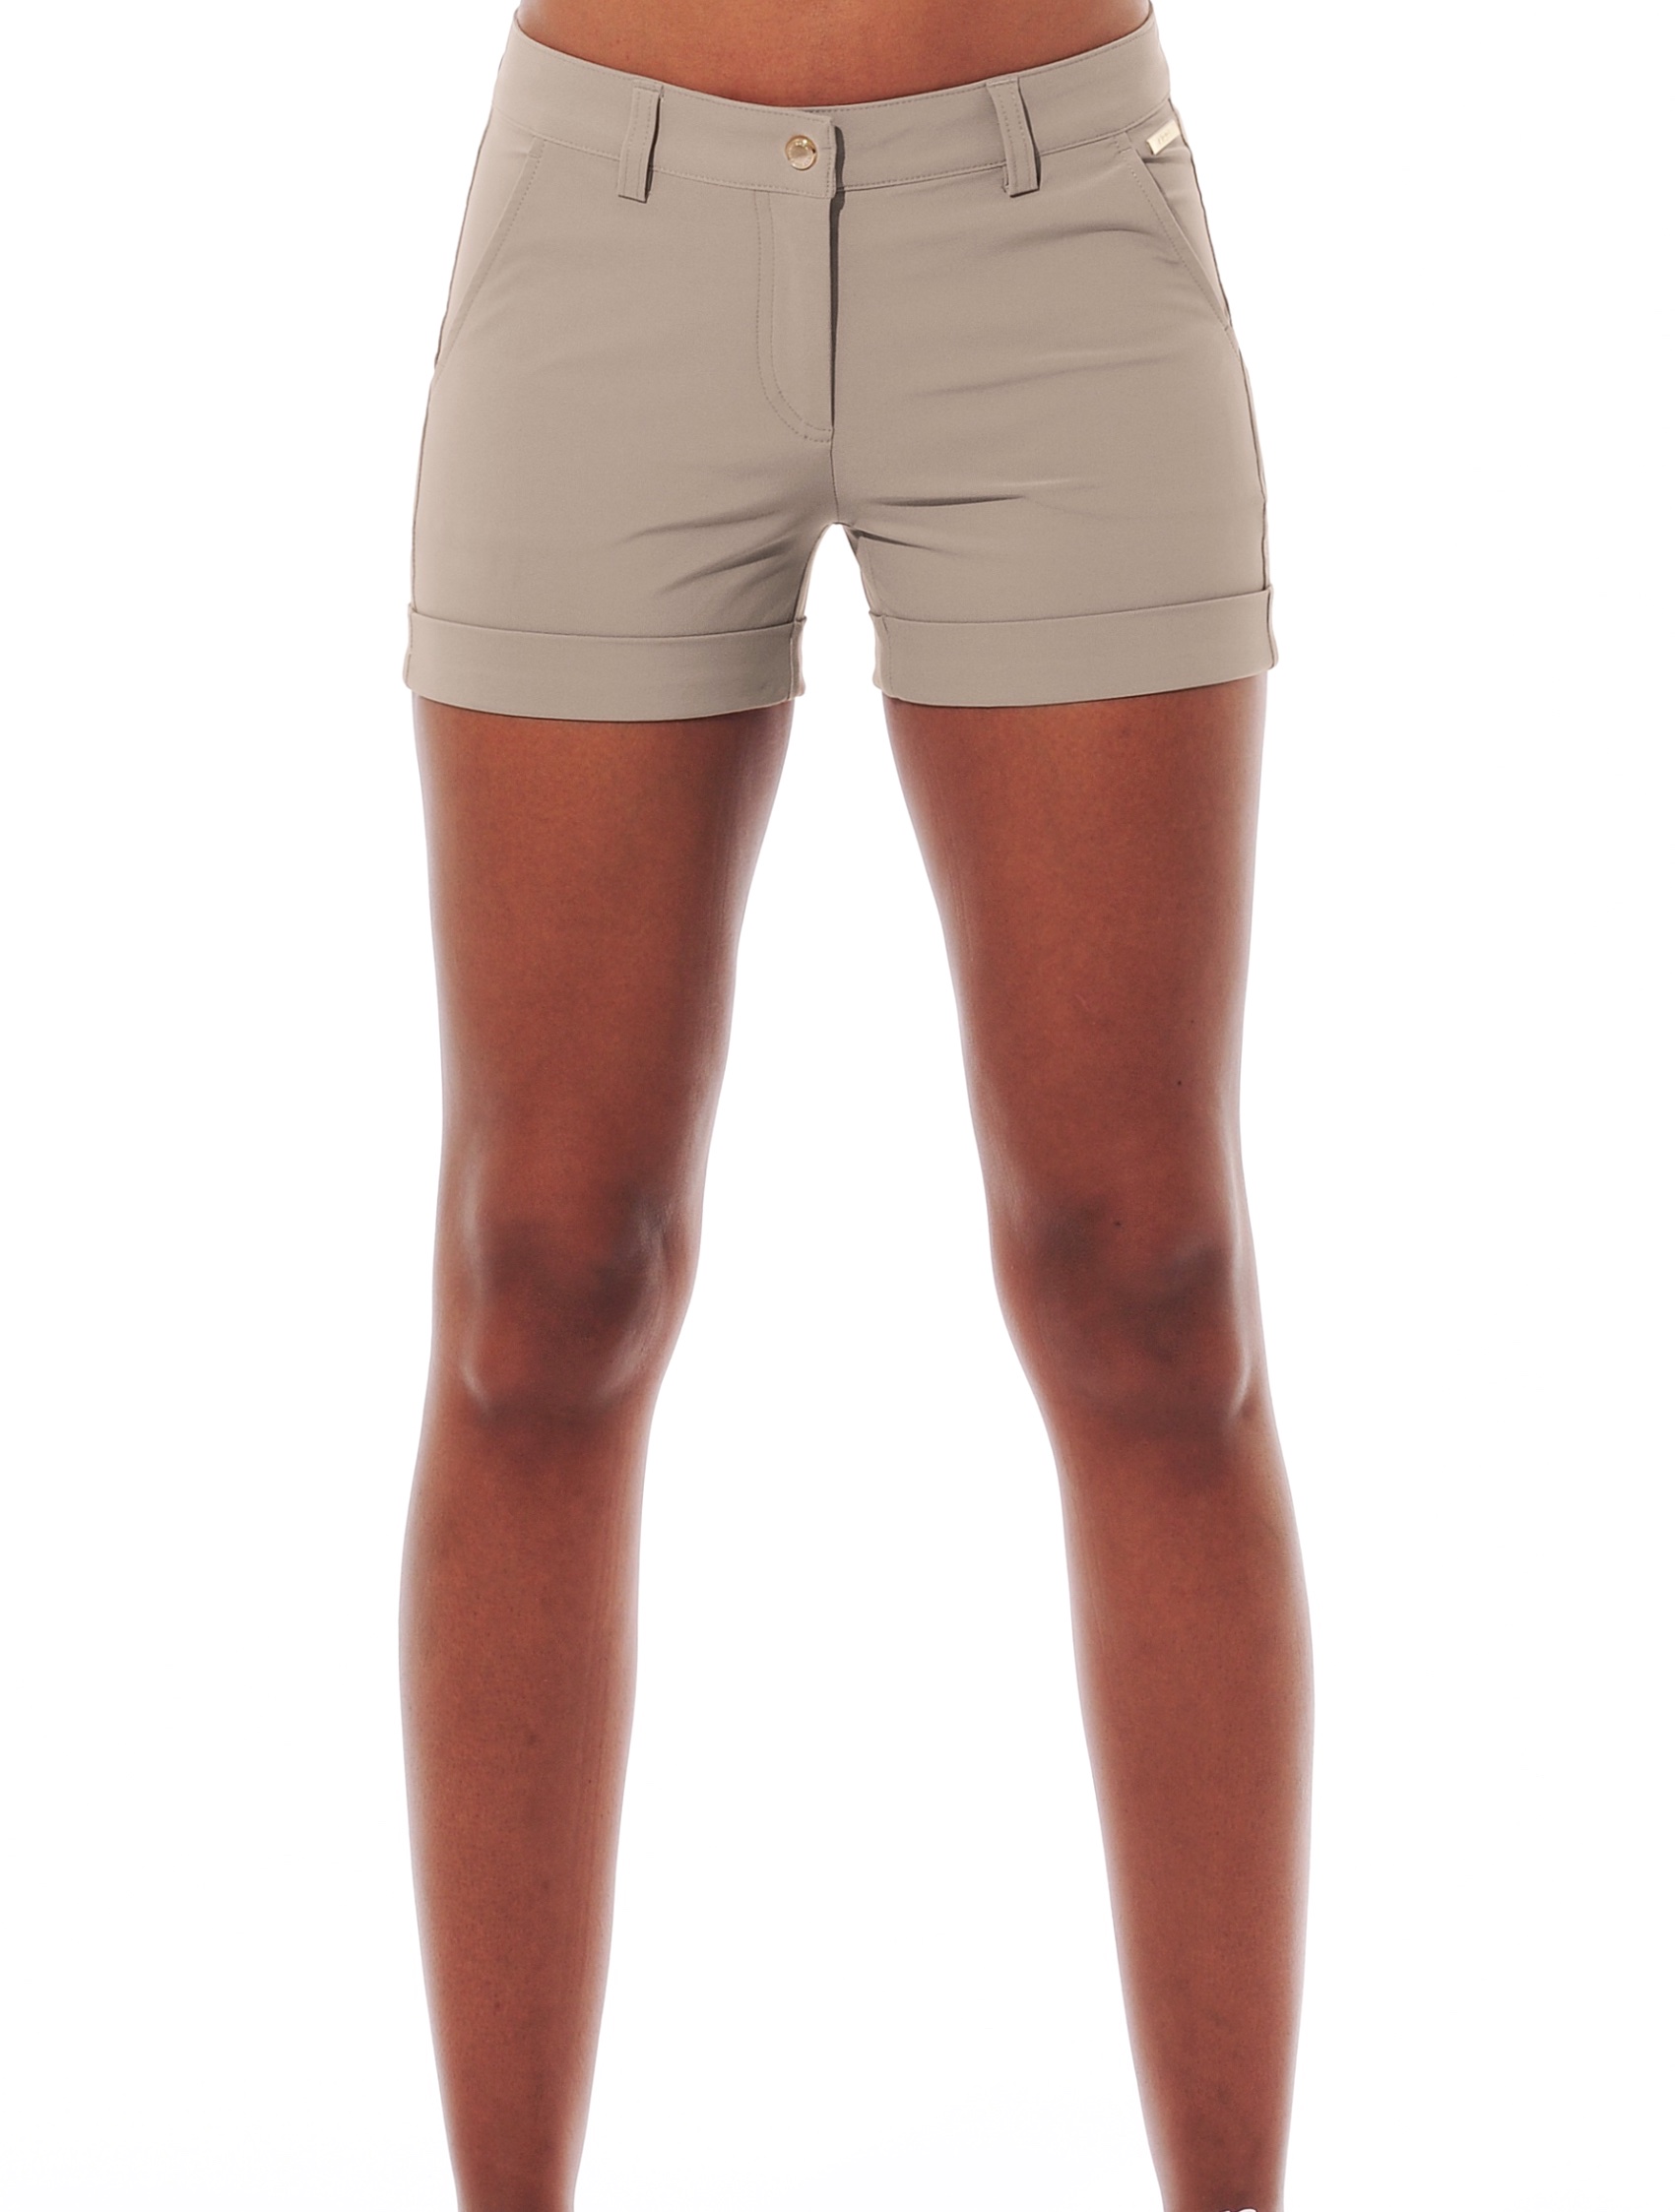 4way stretch short shorts taupe 